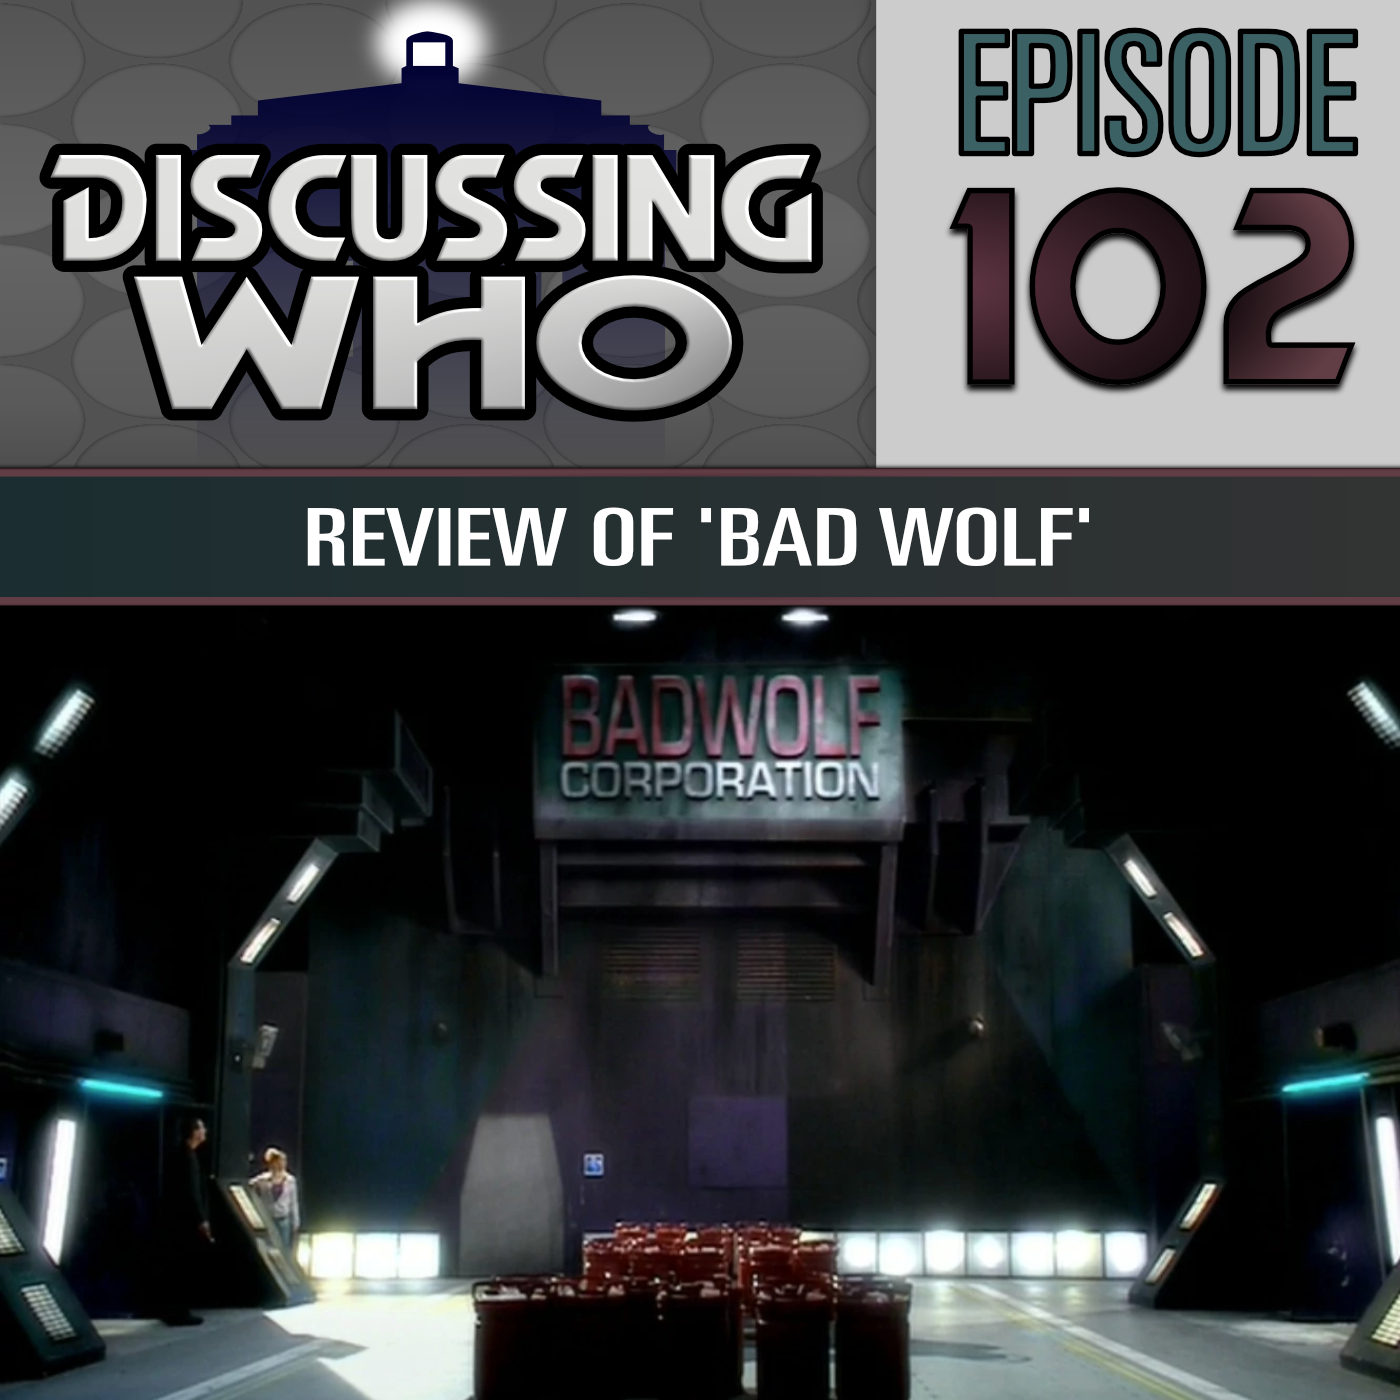 Review of Bad Wolf, Doctor Who Series 1 Episode 12